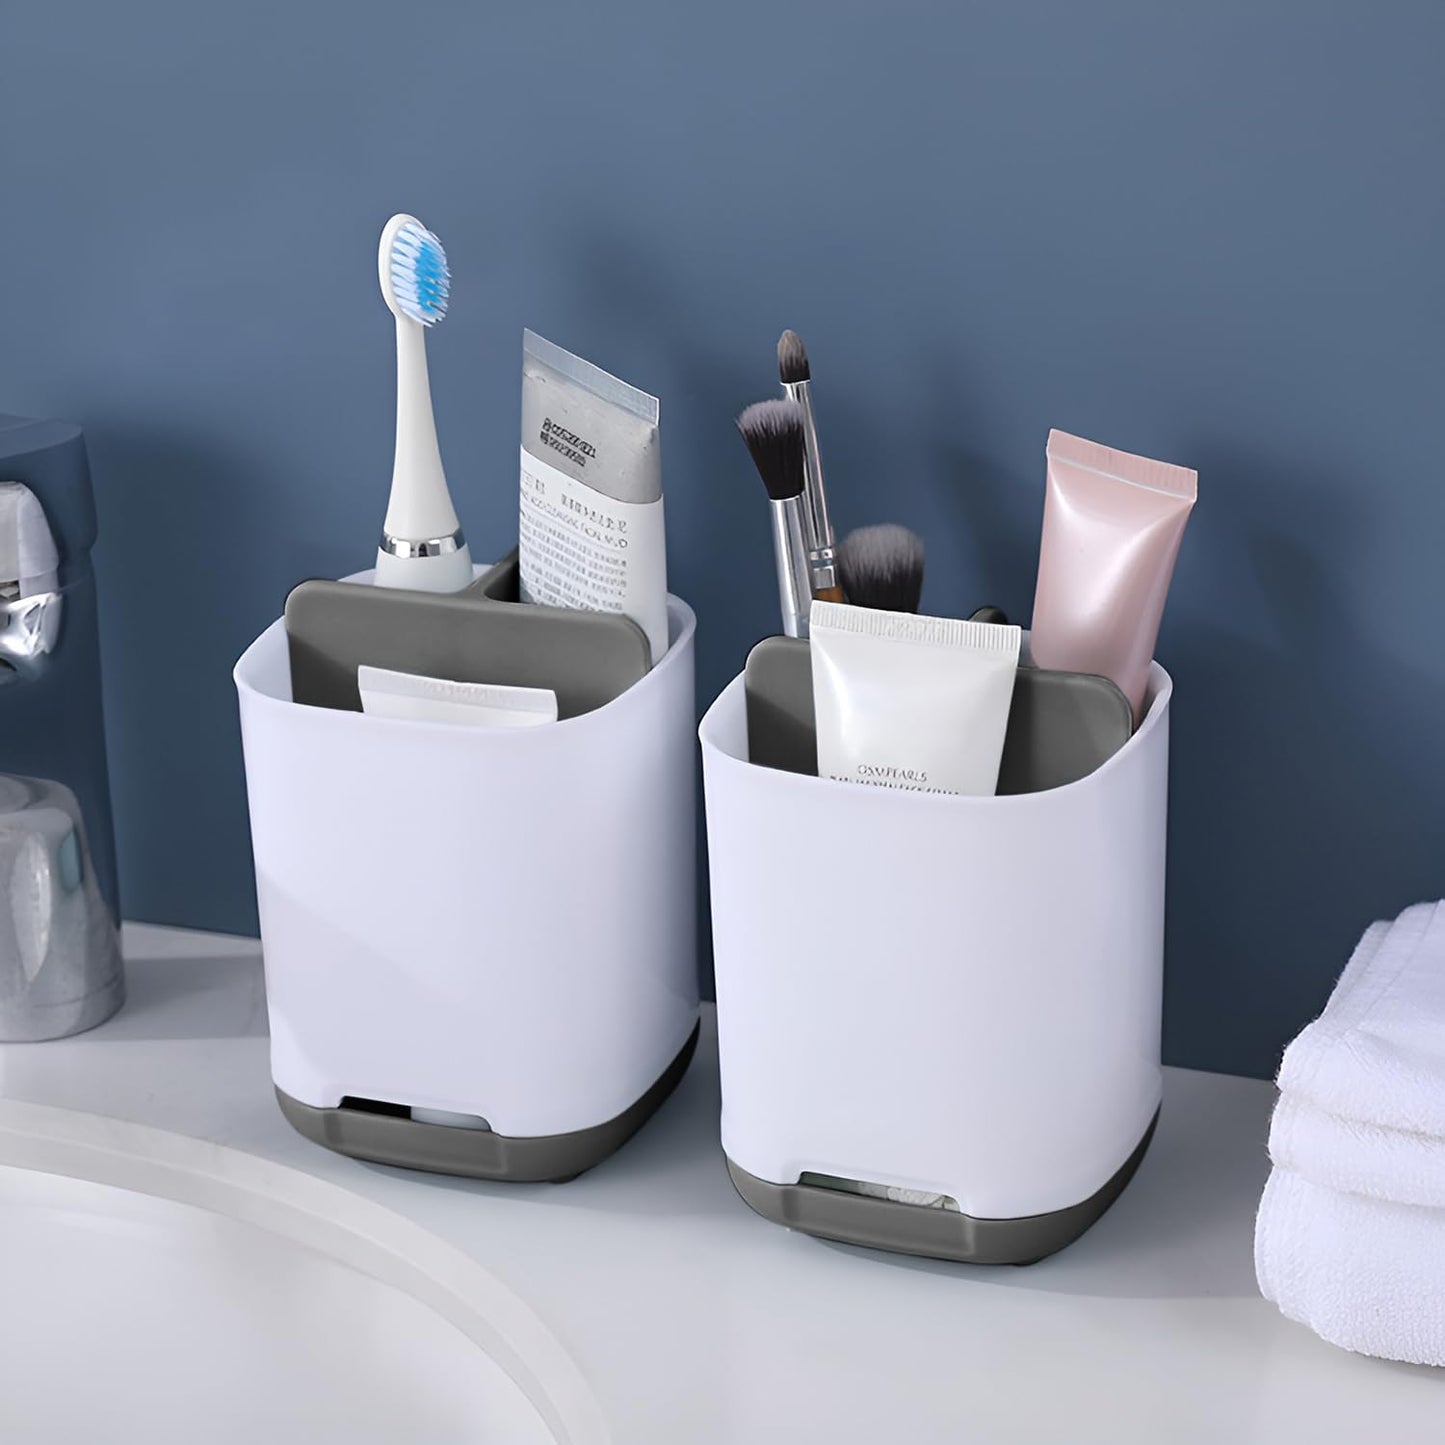 Toothbrush Holder, 3 Slots Toothbrush Organizer with Drainage Holes Multifunctional Electric Toothbrush Holder Easy Cleaning Multi-Functional Storage Box (Gray-S)